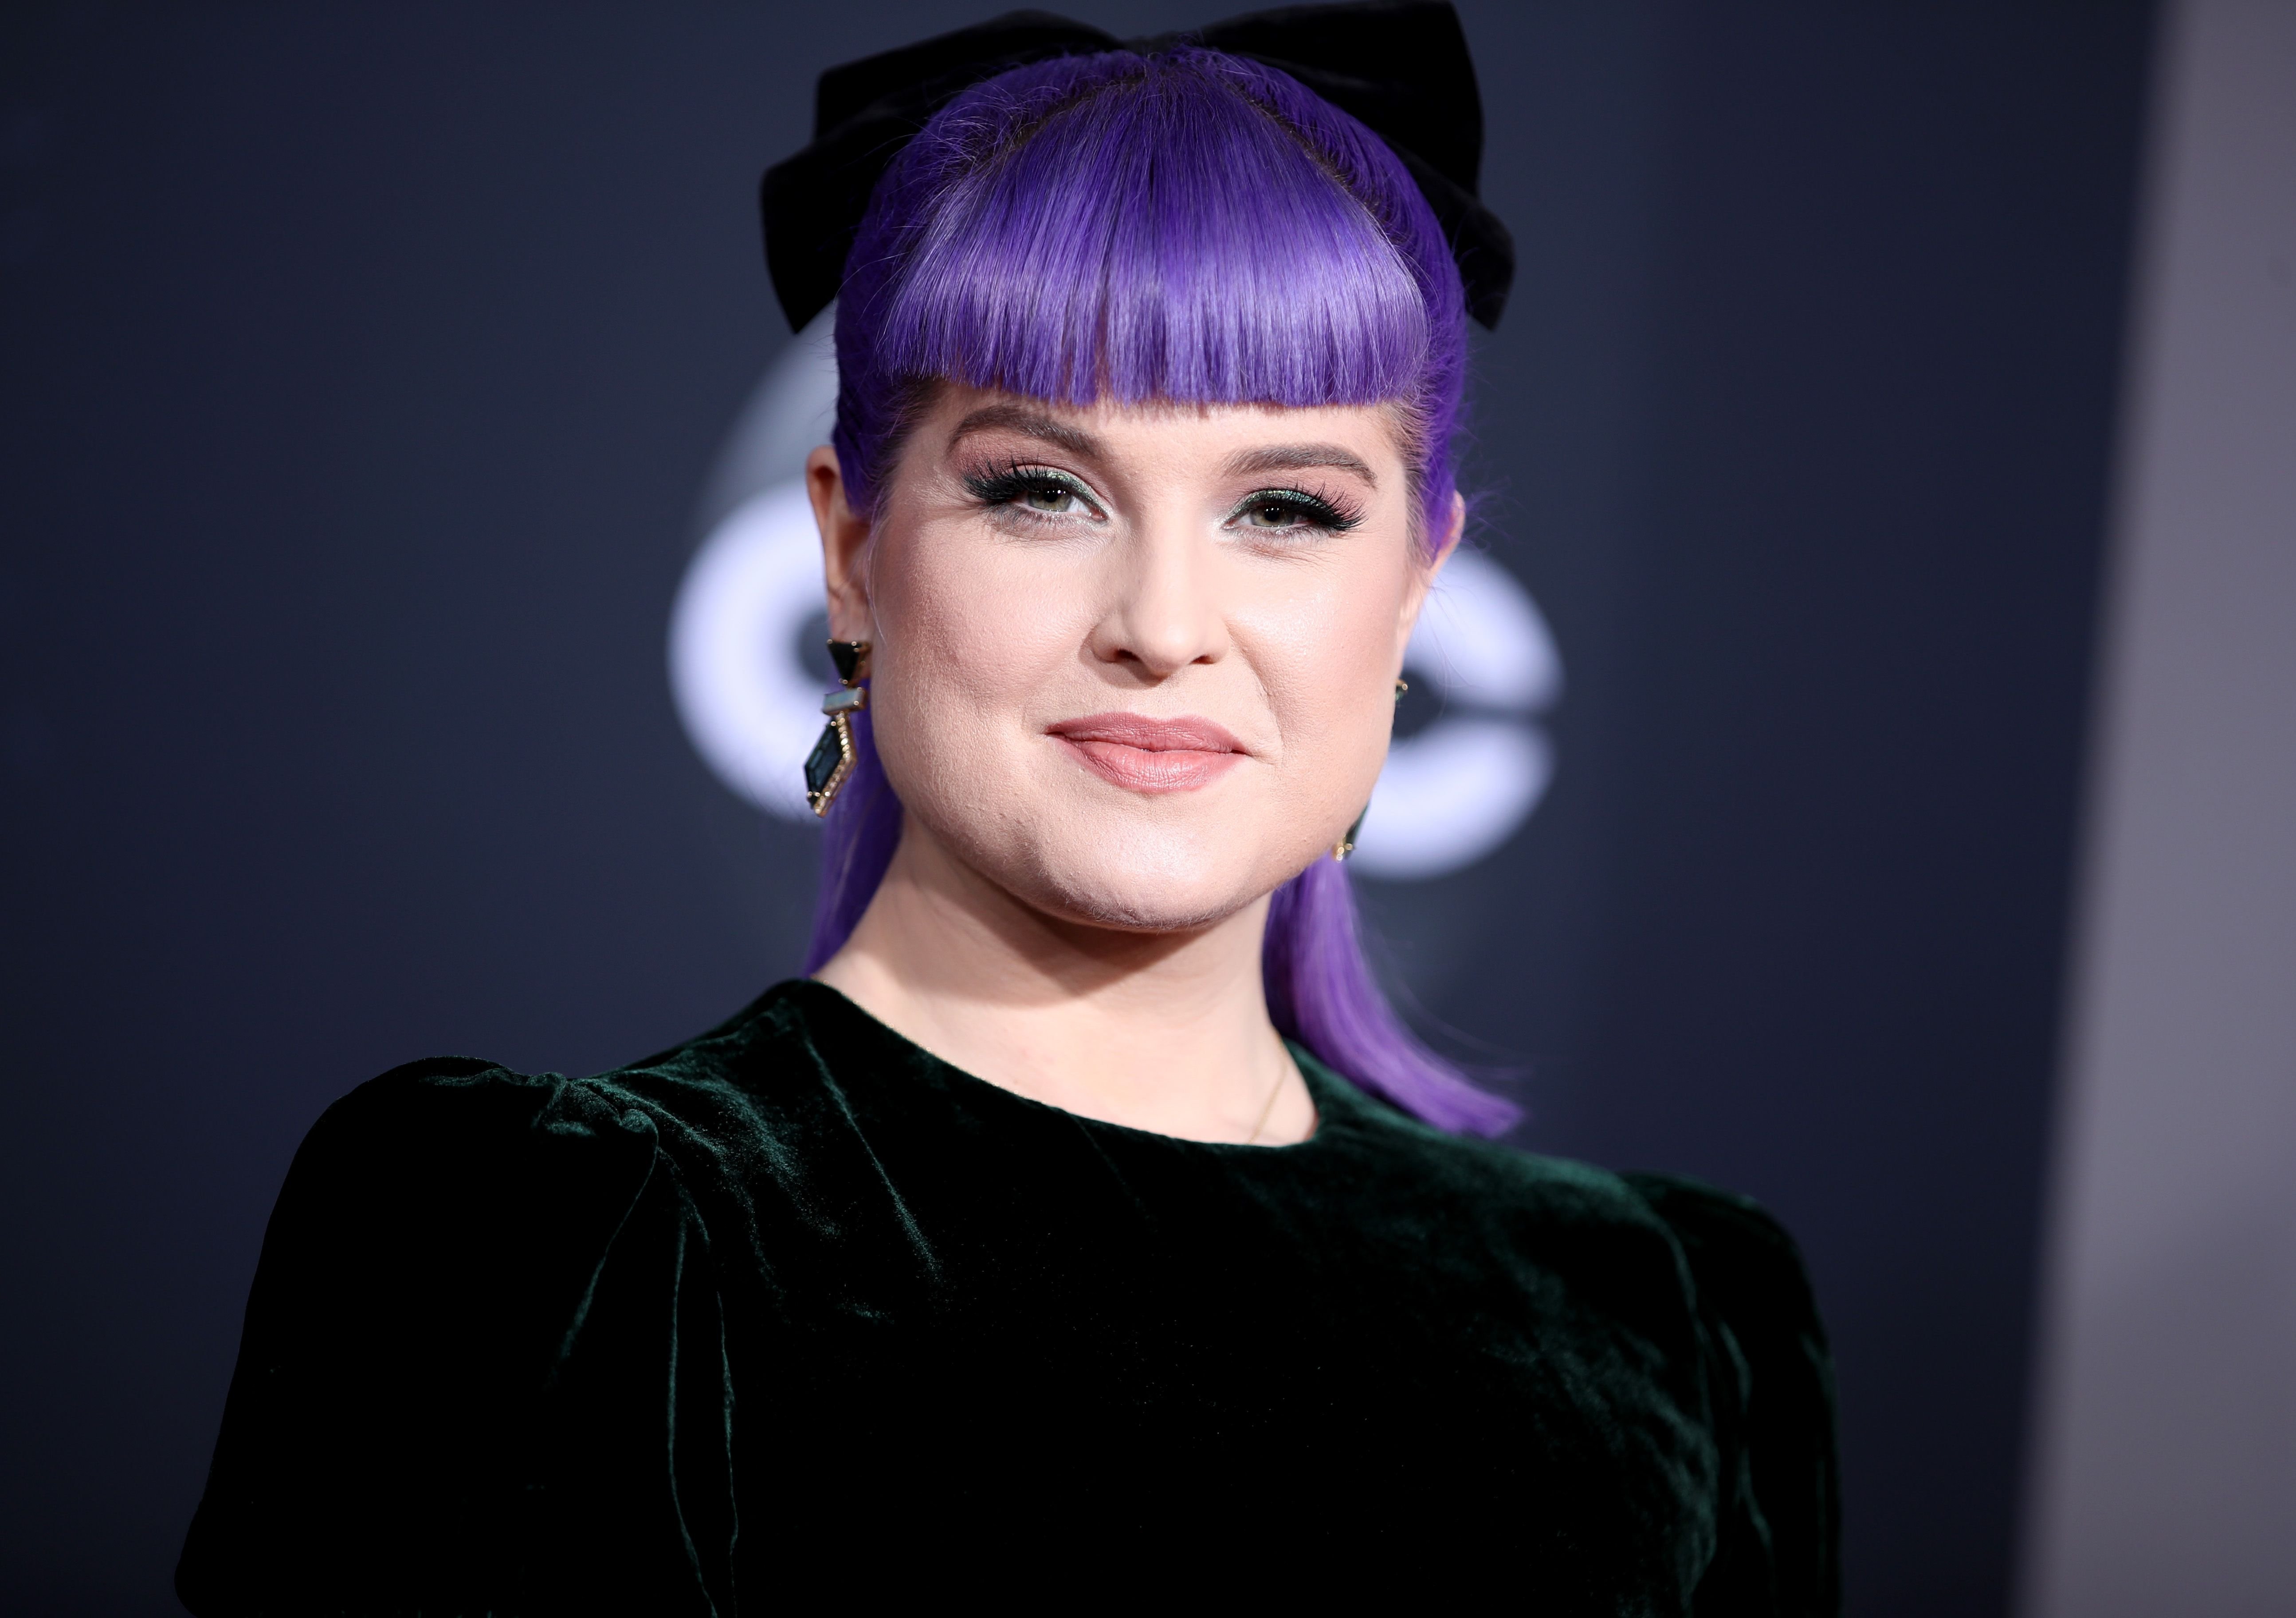 Kelly Osbourne during the 2019 American Music Awards at the Microsoft Theater on November 24, 2019 in Los Angeles, California. | Source: Getty Images